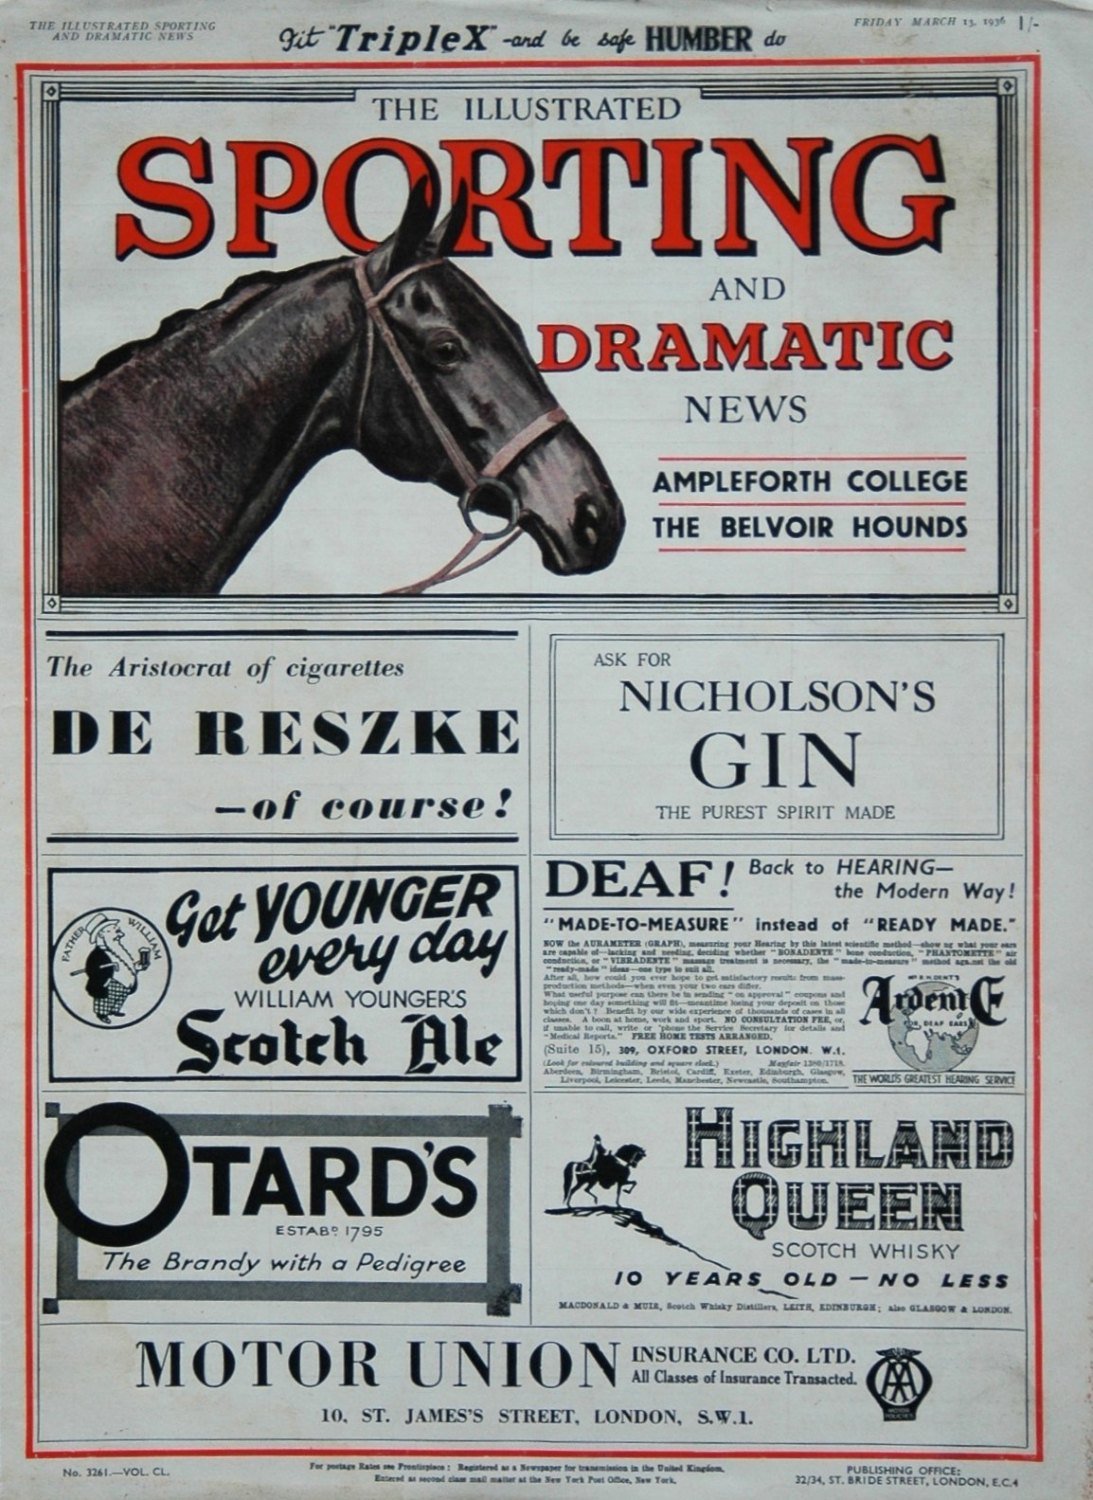 Illustrated Sporting and Dramatic News March 13th 1936.